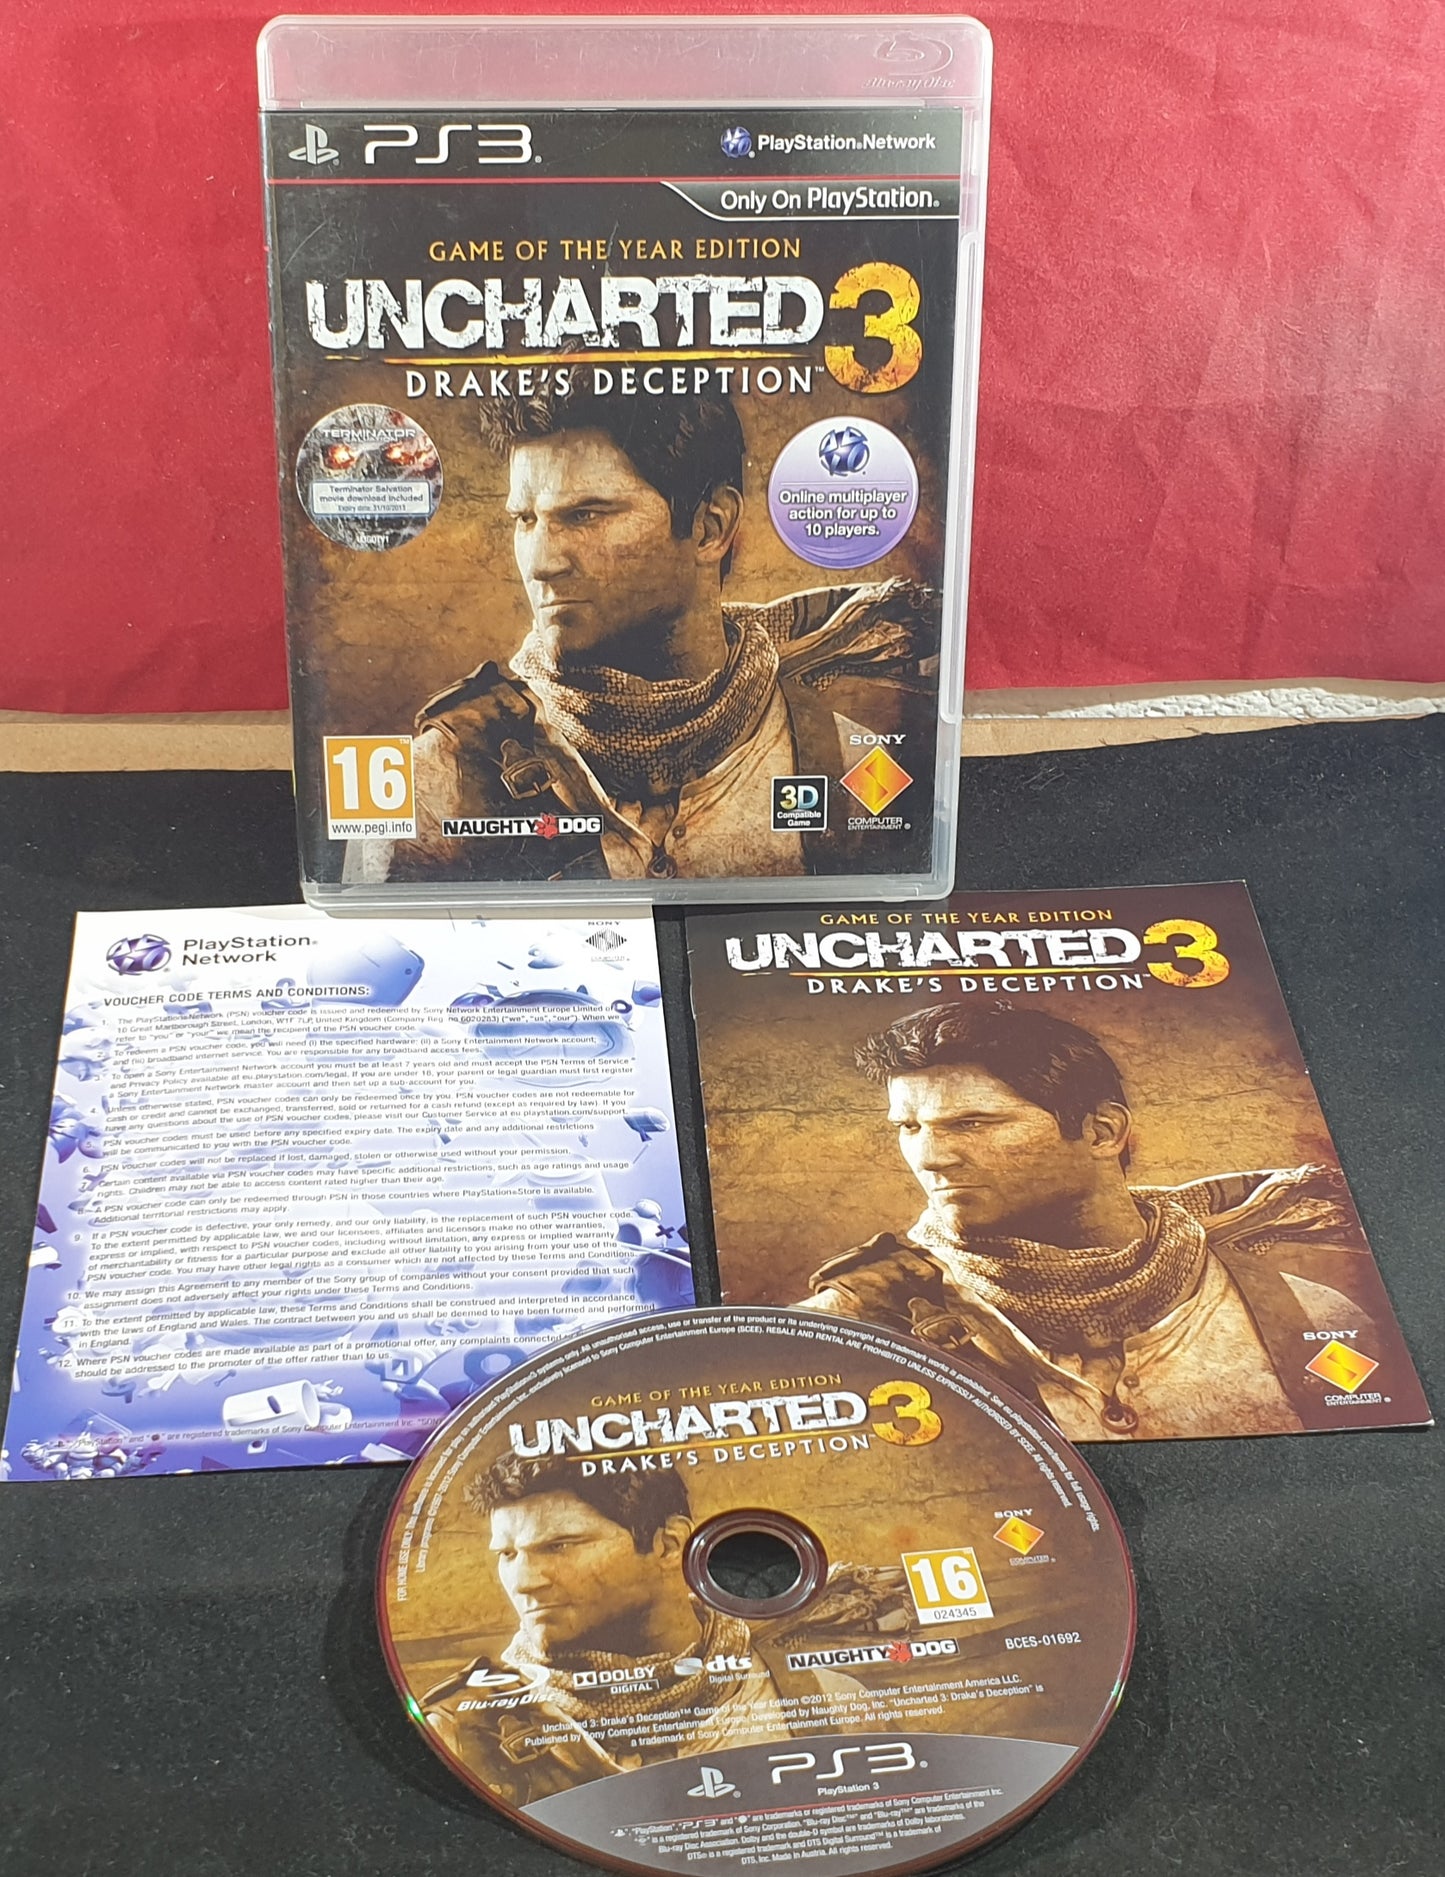 Uncharted 3 Drake's Deception Game of the Year Edition Sony Playstation 3 (PS3) Game